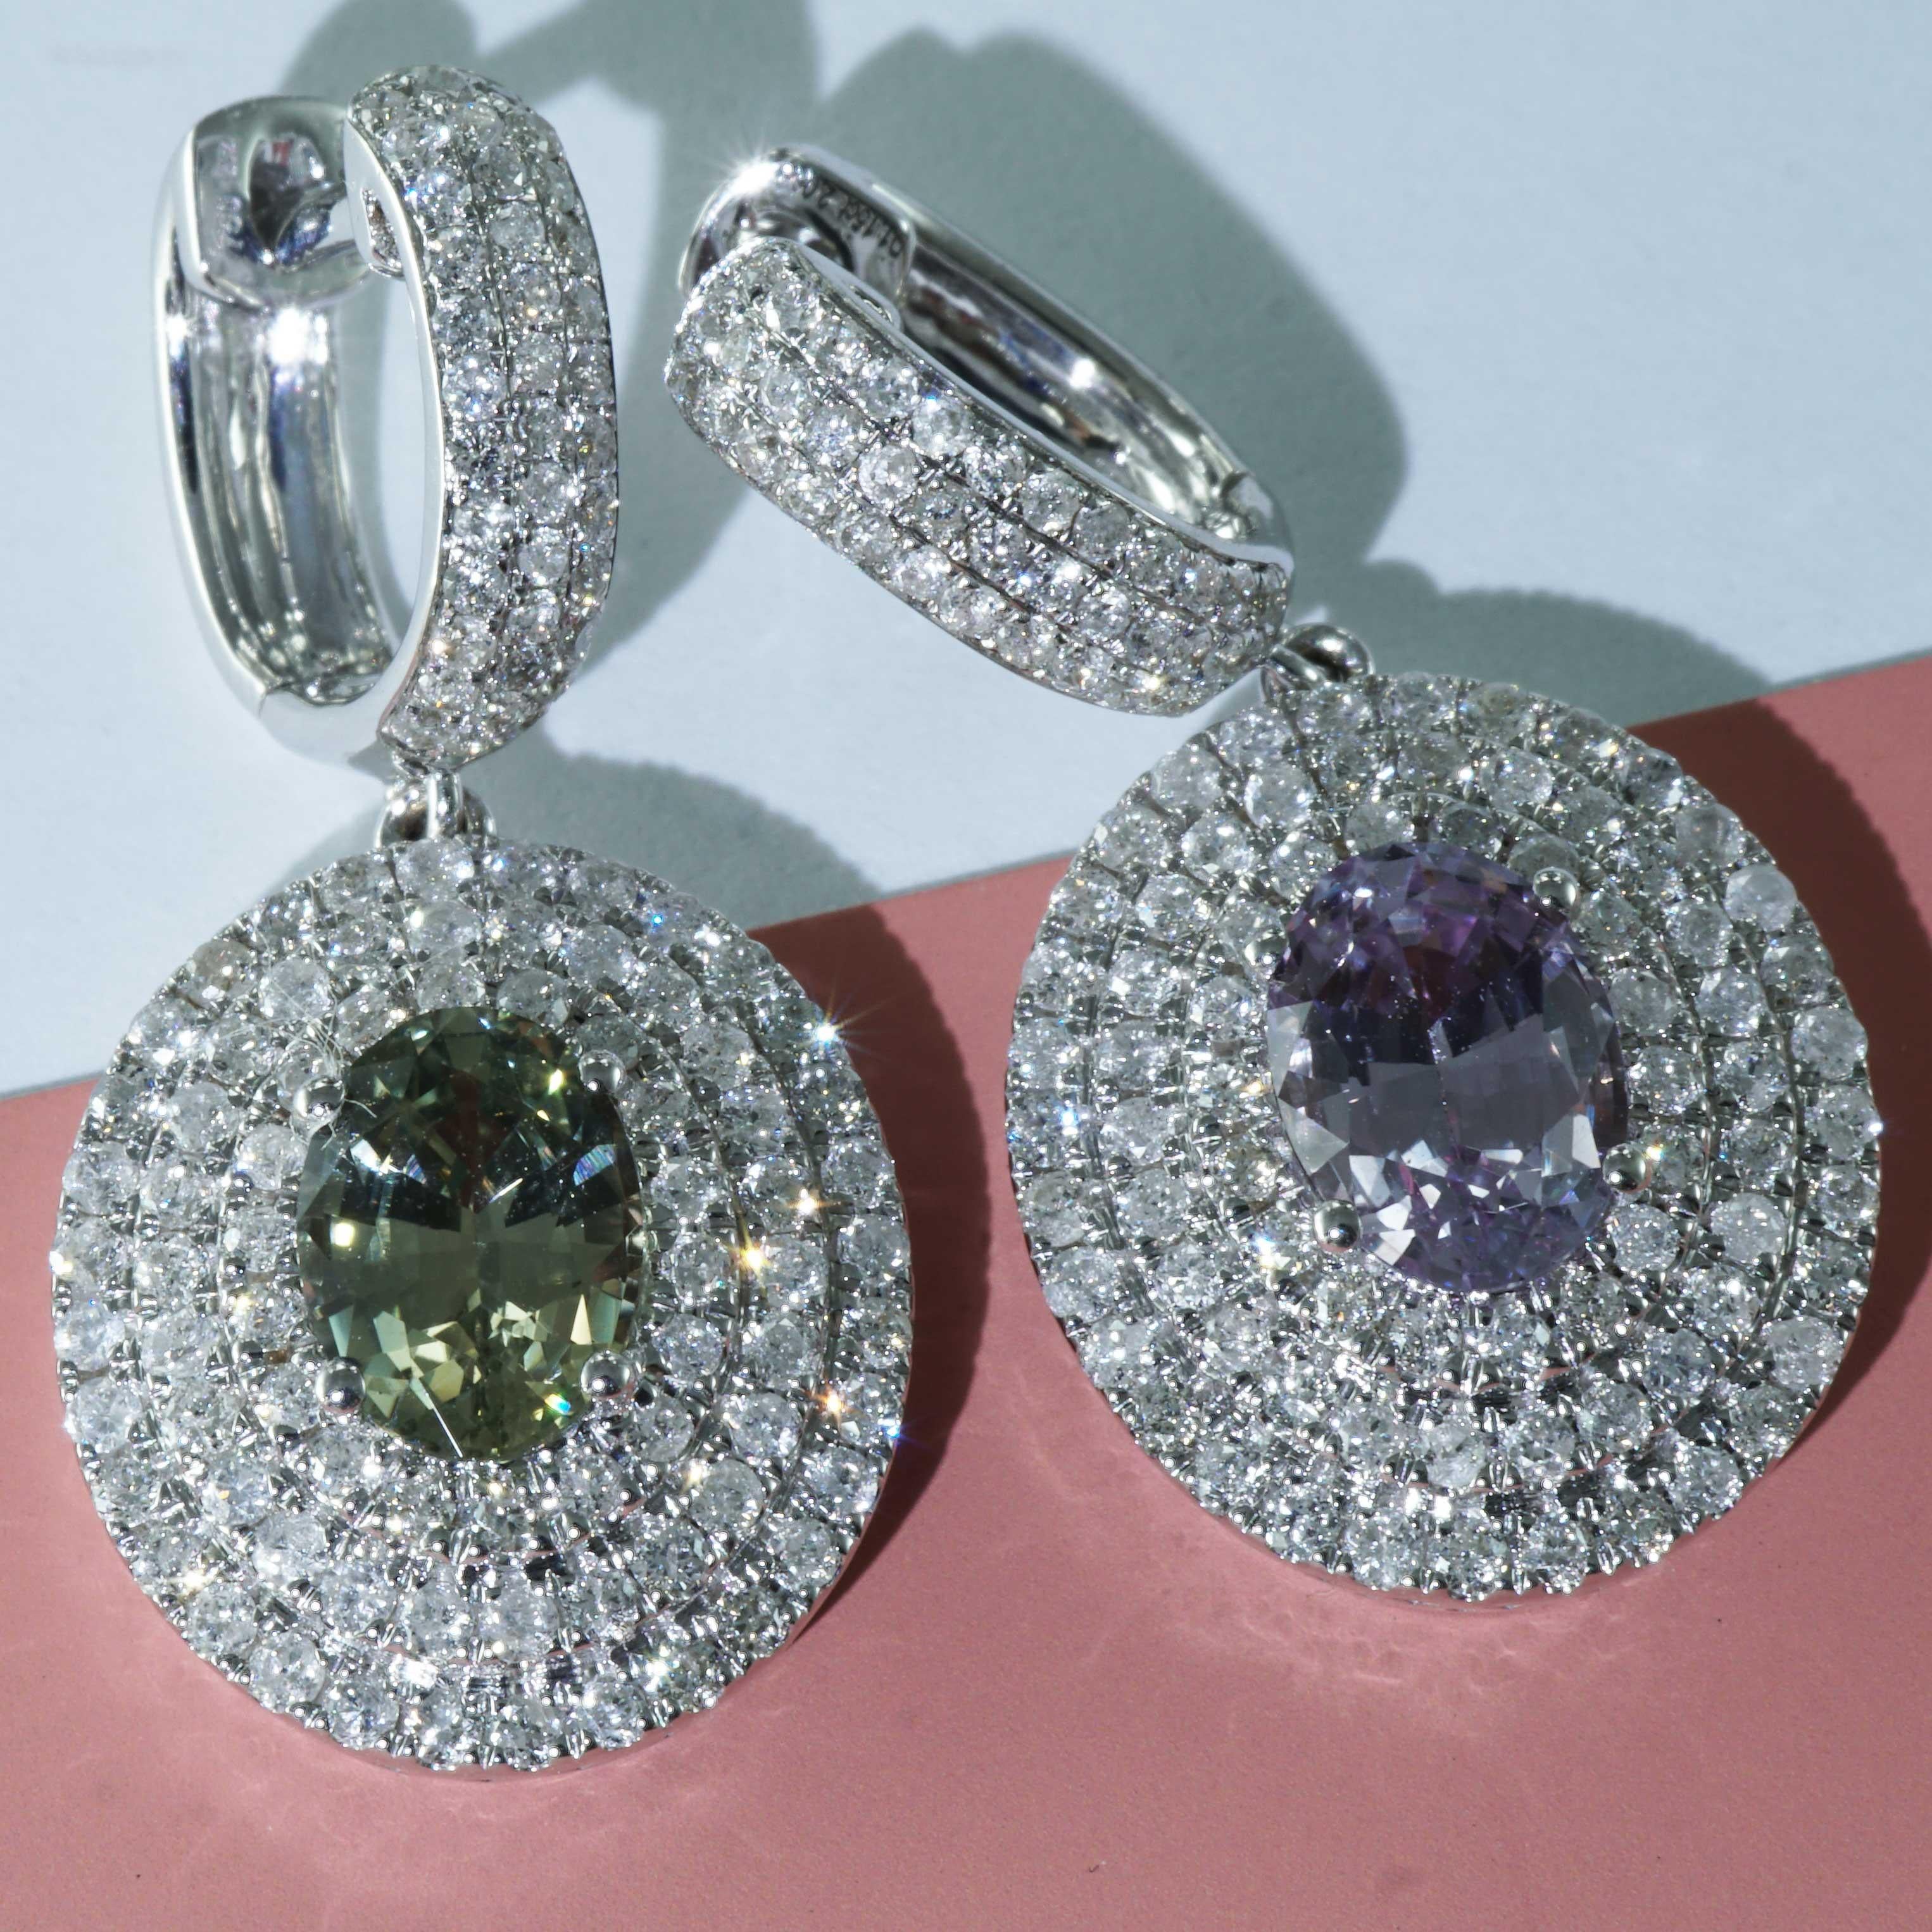 untreated NATURAL COLOR sapphires always a rarity, most sapphires are heated, wonderfully set in halo style with a triple brilliant-cut diamond wreath, 2 sapphires in different colors green and lavender total ca. 2.06 ct, AAA+, excellent cut, held